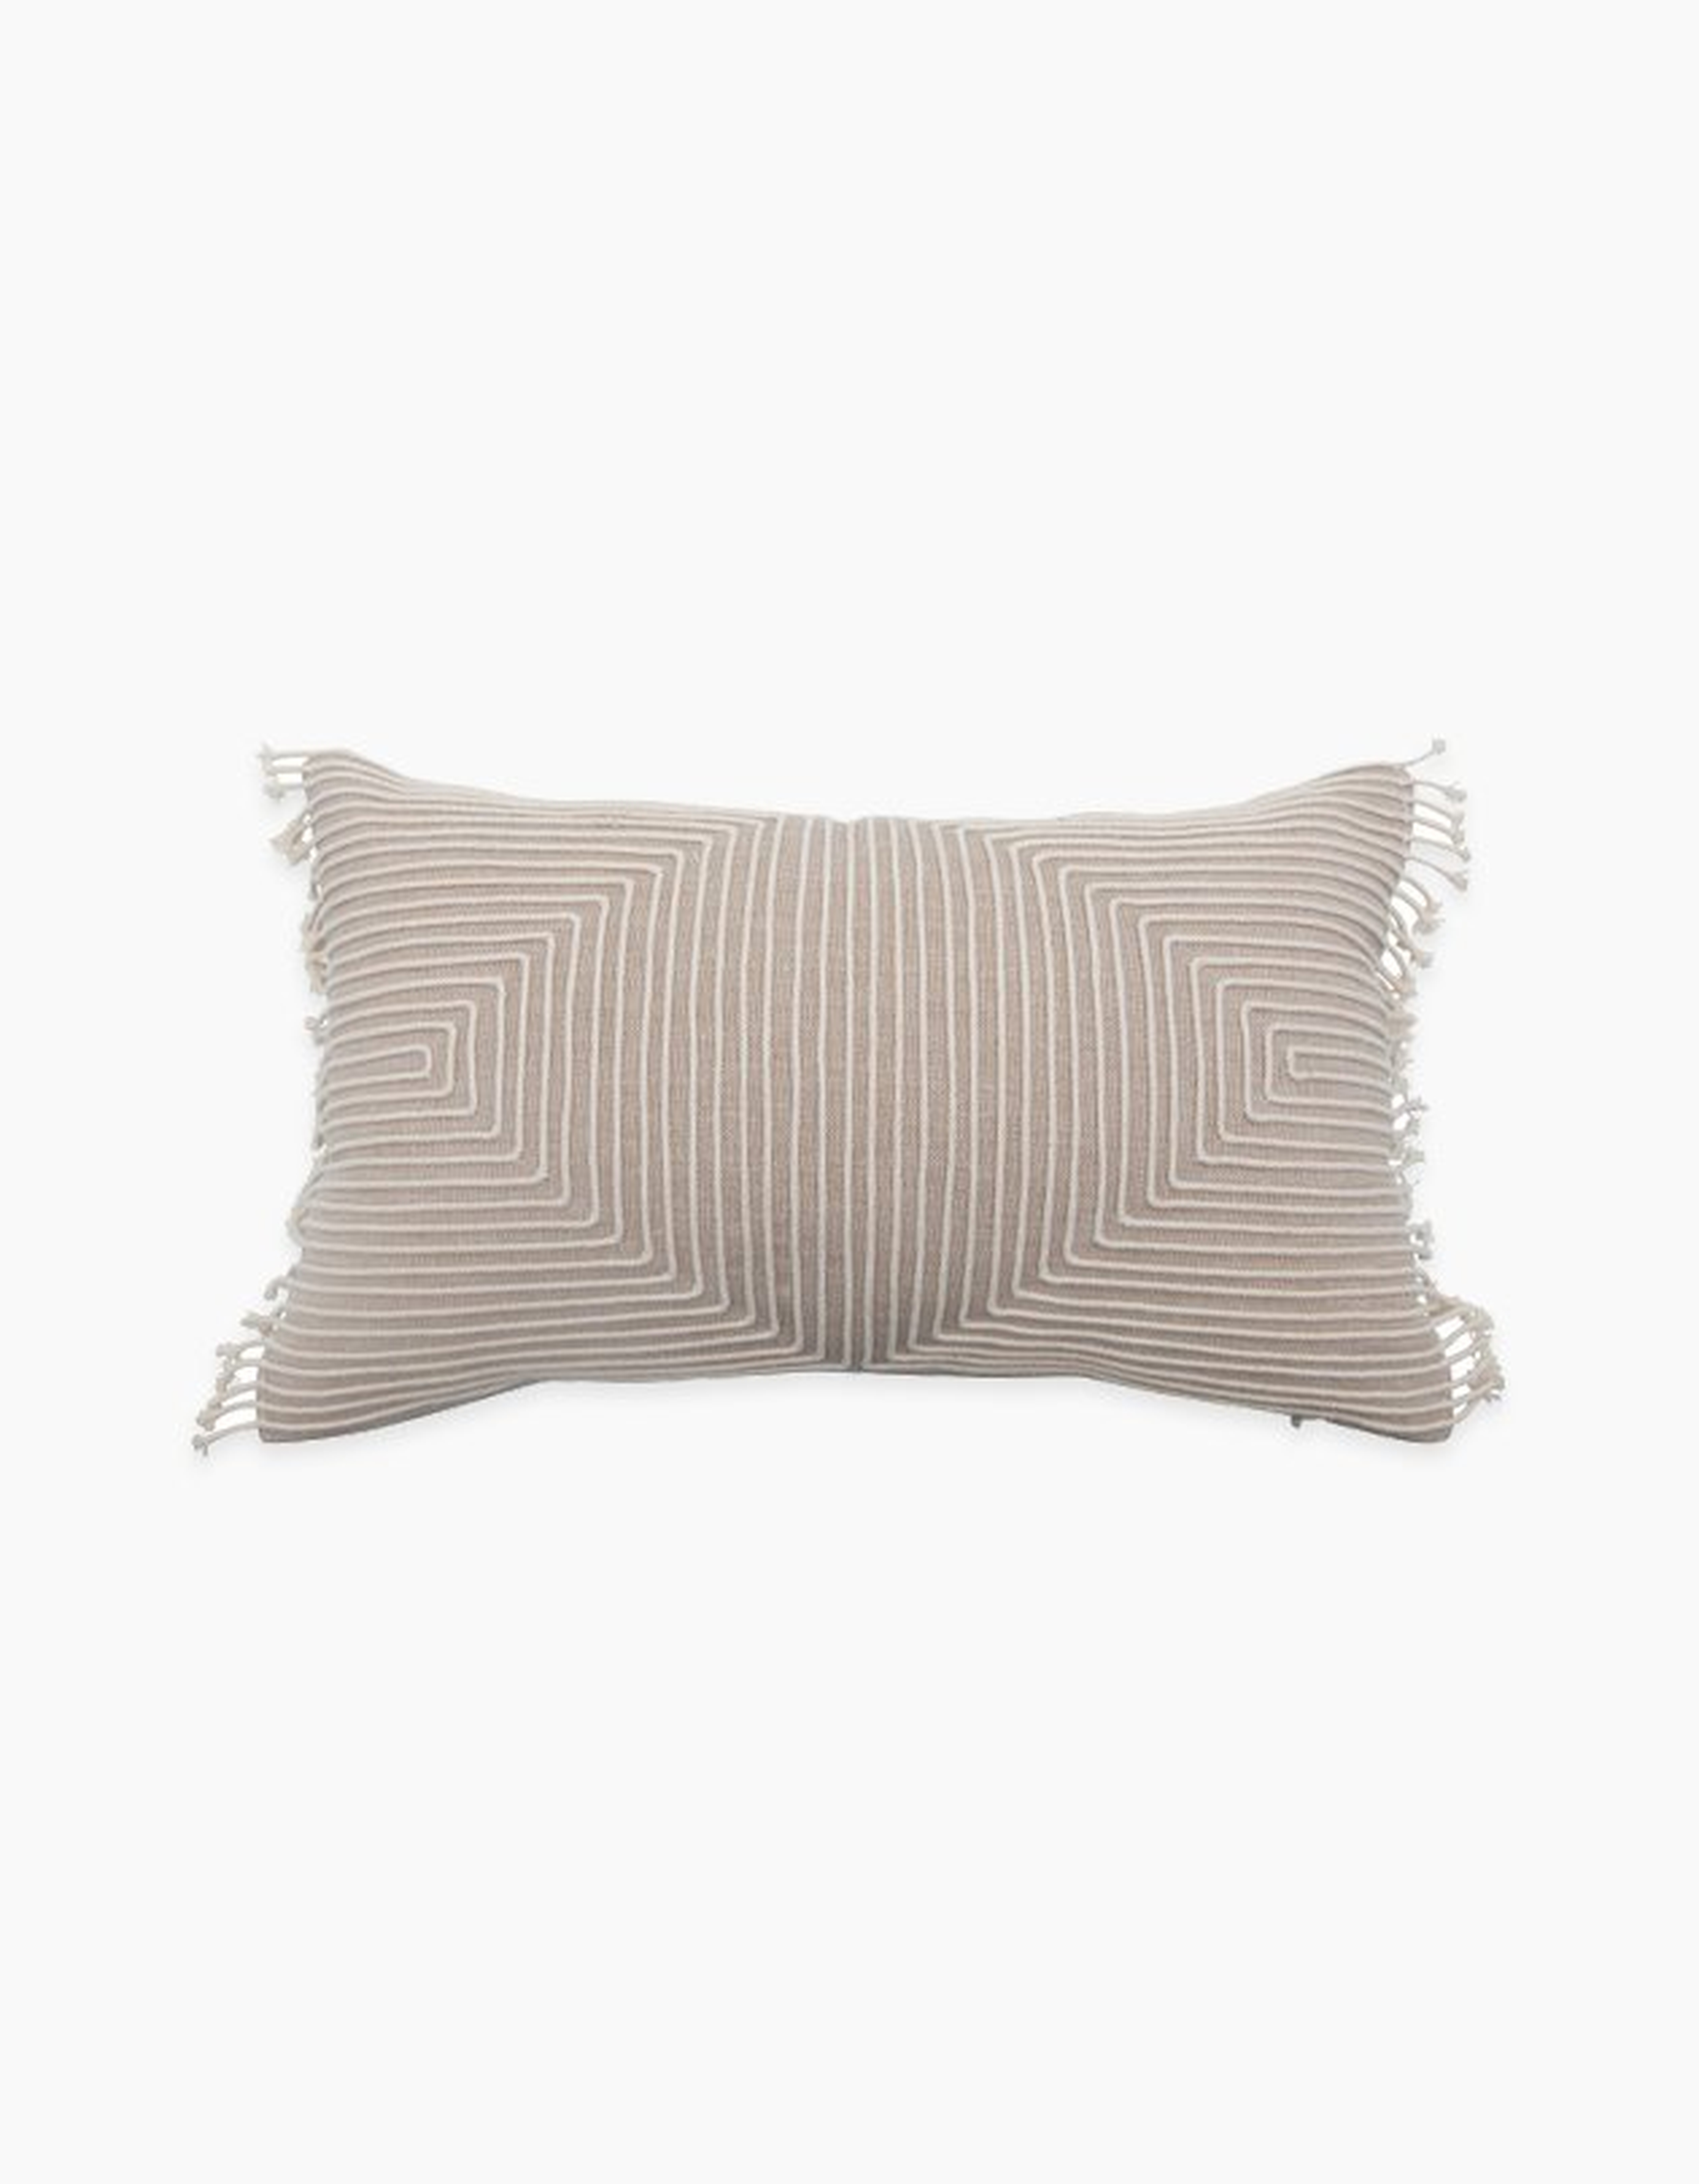 Cotton Chambray Appliqued Lumbar Pillow with Piping & Fringe - Nomad Home